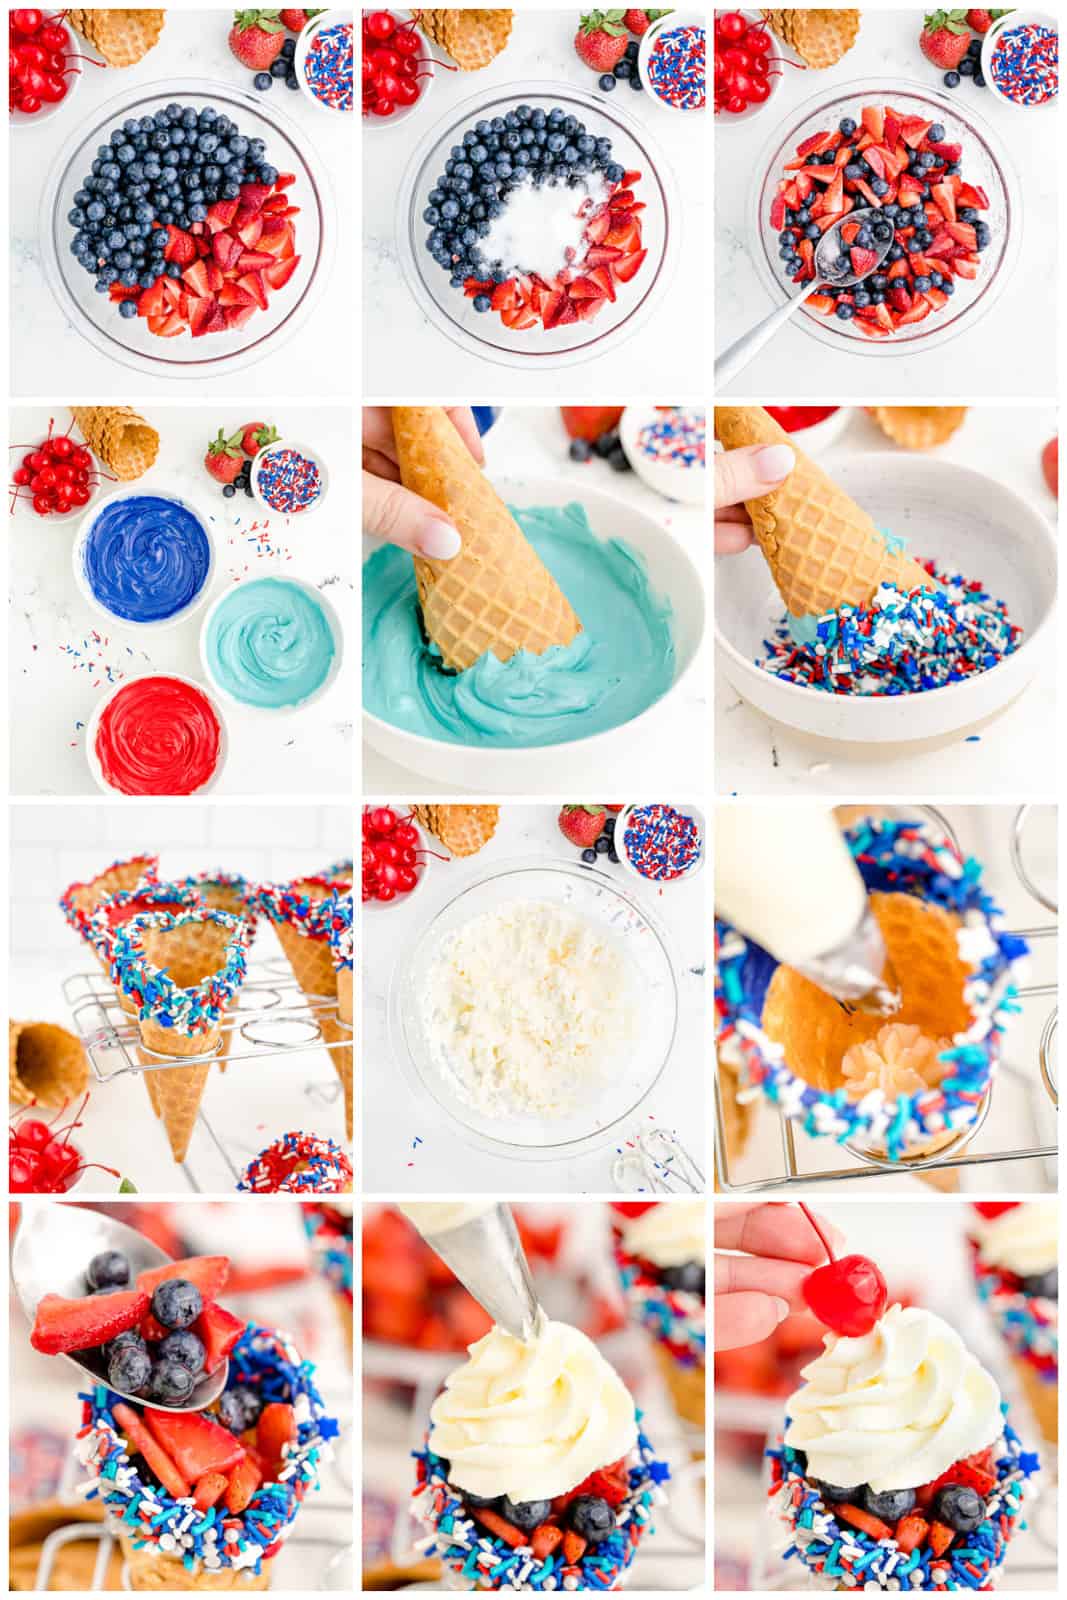 Step by step photos on how to make Fruit Cones